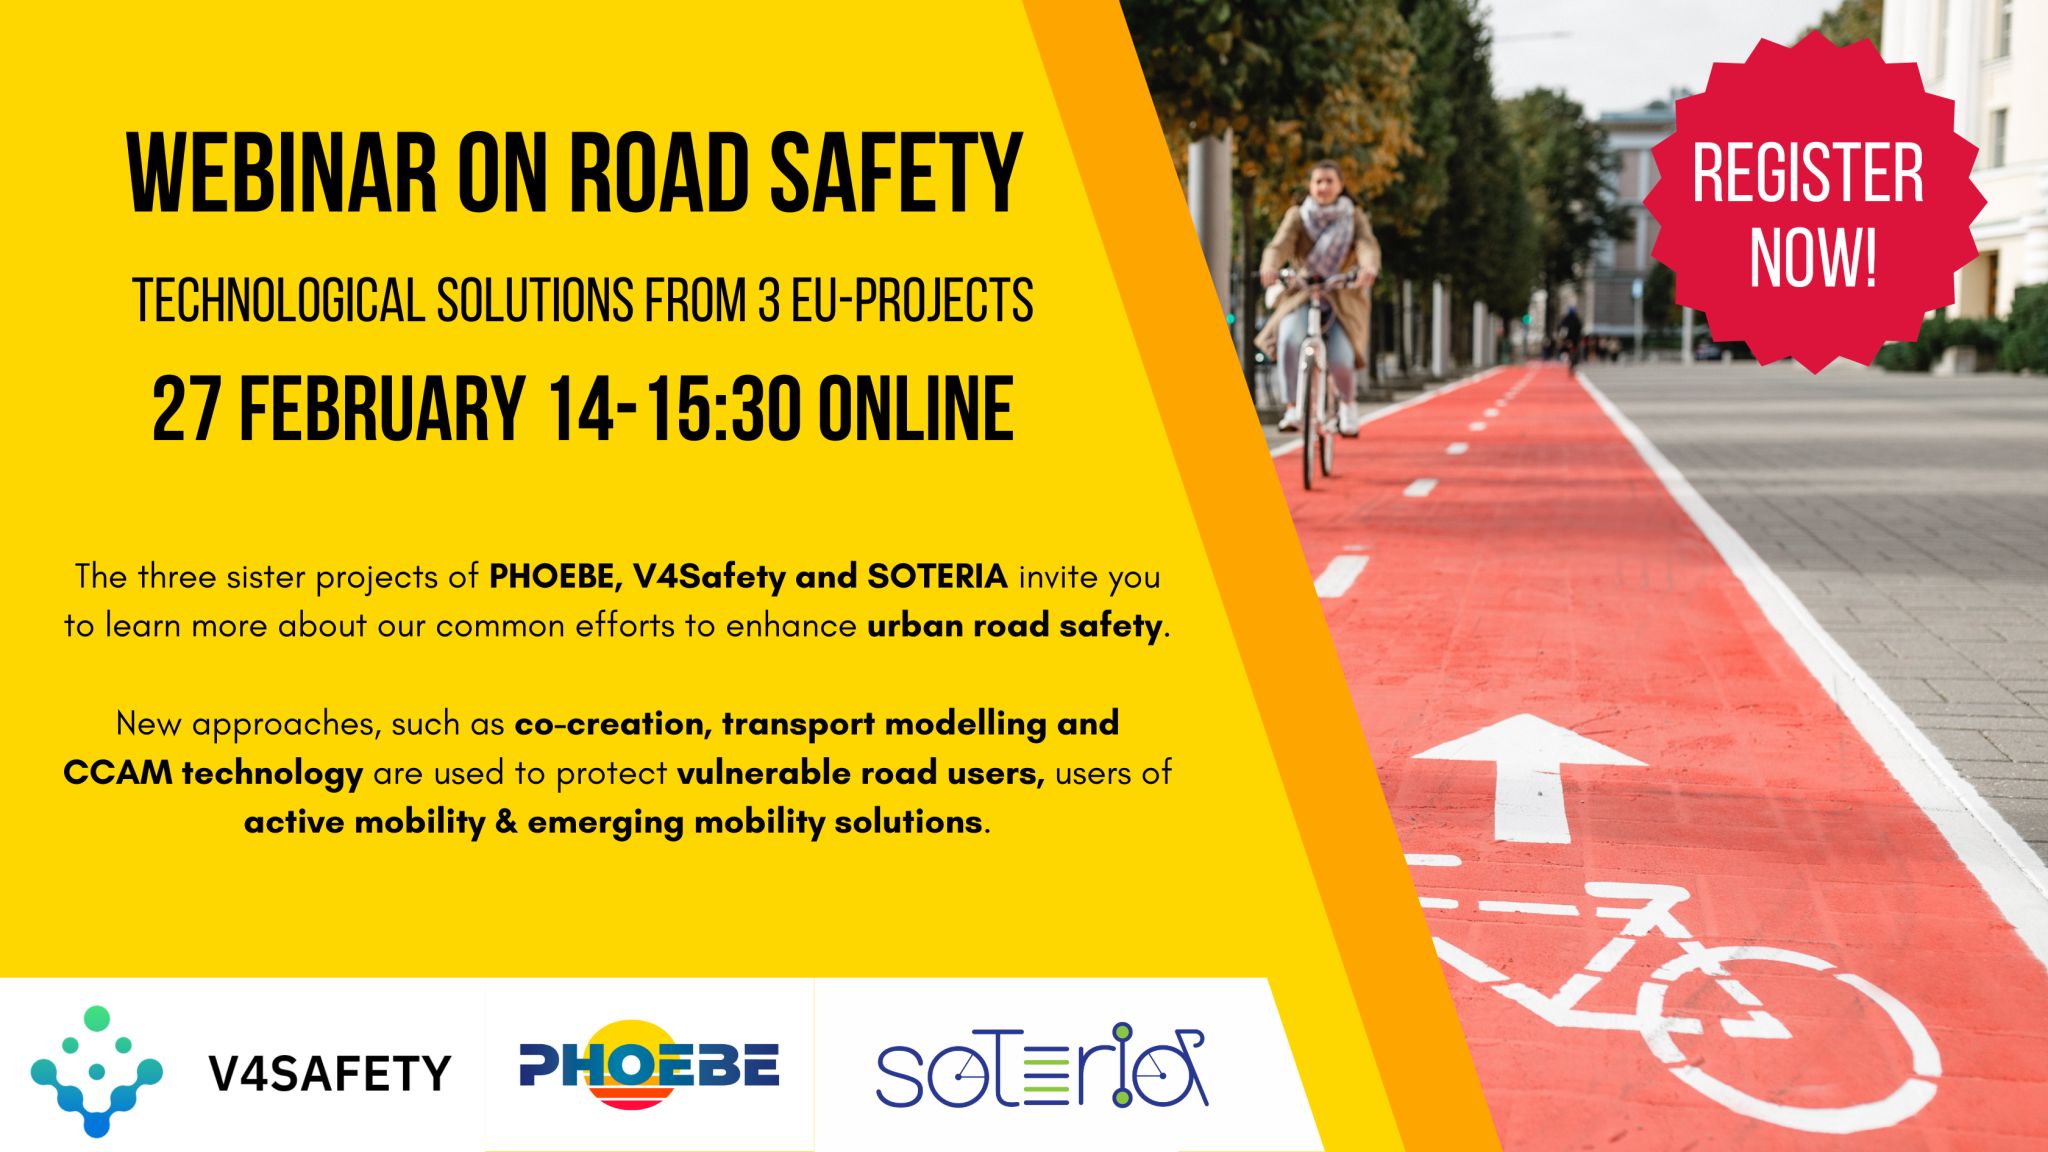 Joint Webinar on Road Safety: Follow the Innovative Technological Solutions proposed by 3 EU-funded projects